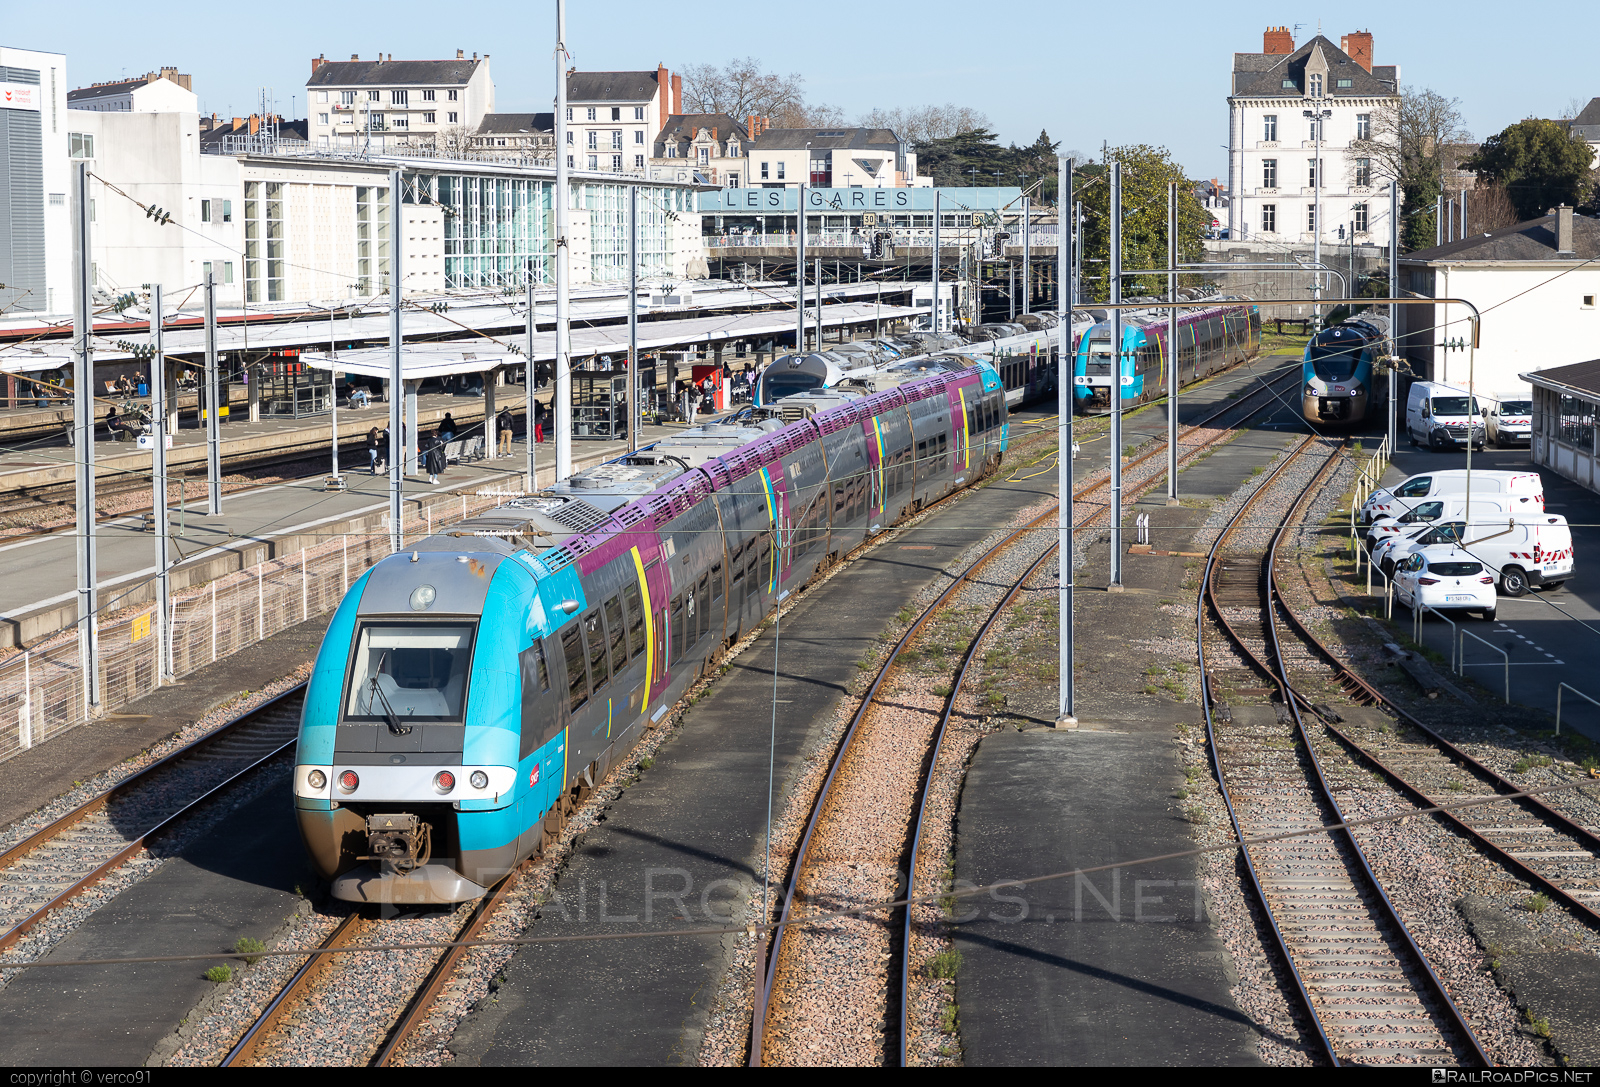 SNCF Class X 76500 - 76785 operated by SNCF Voyageurs #sncf #sncfClassX76500 #sncfvoyageurs